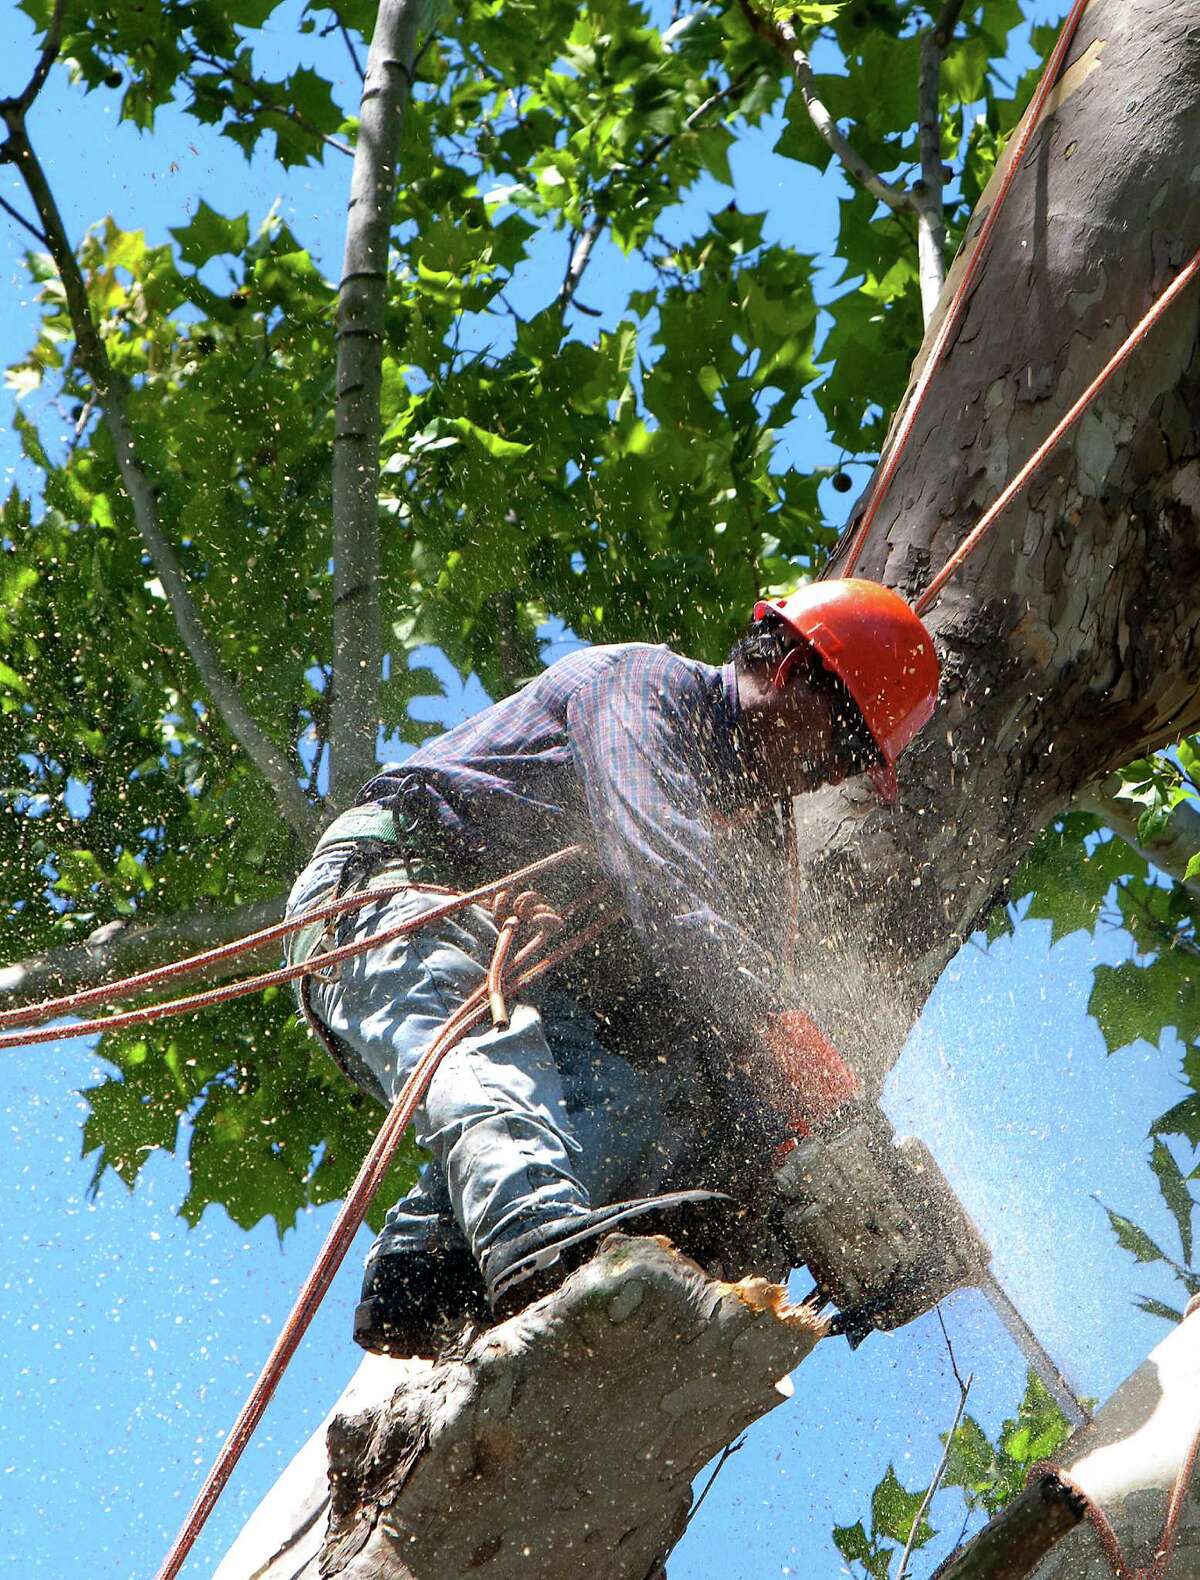 A crew cuts down a historic, century-old Sycamore tree at the corner of Oxford Street and 23rd St., Monday, June 17, 2013, in Houston. Locals showed their support in keeping the tree as they stood in protest. The tree is 106-feet tall, according to the 2011 Harris County Tree Registry.